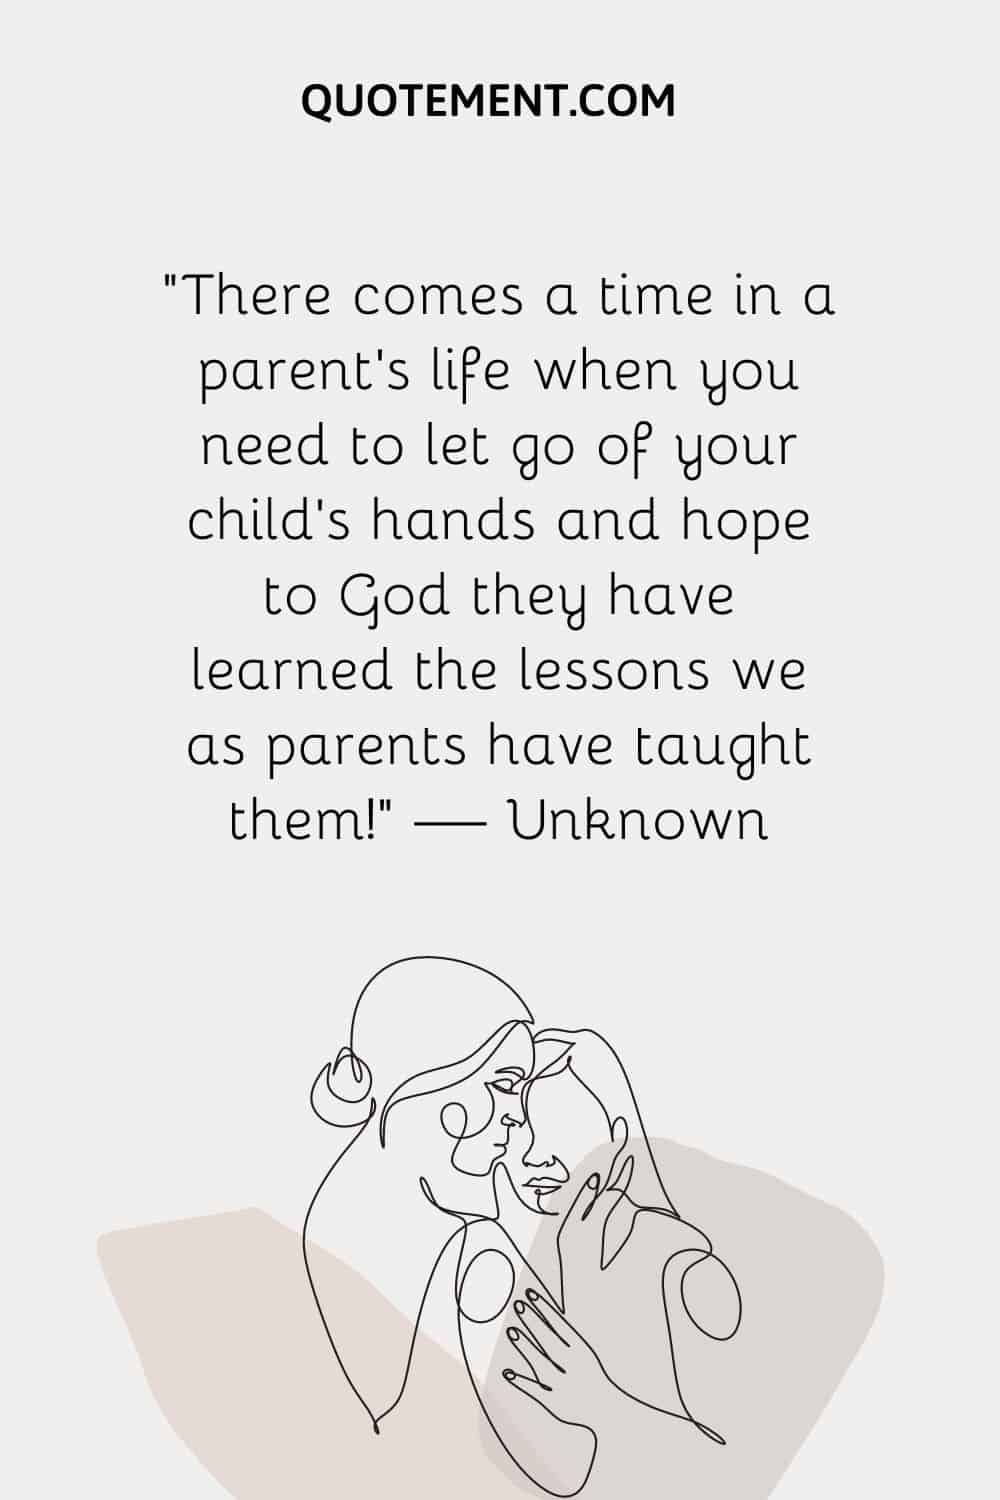 “There comes a time in a parent's life when you need to let go of your child’s hands and hope to God they have learned the lessons we as parents have taught them!” — Unknown